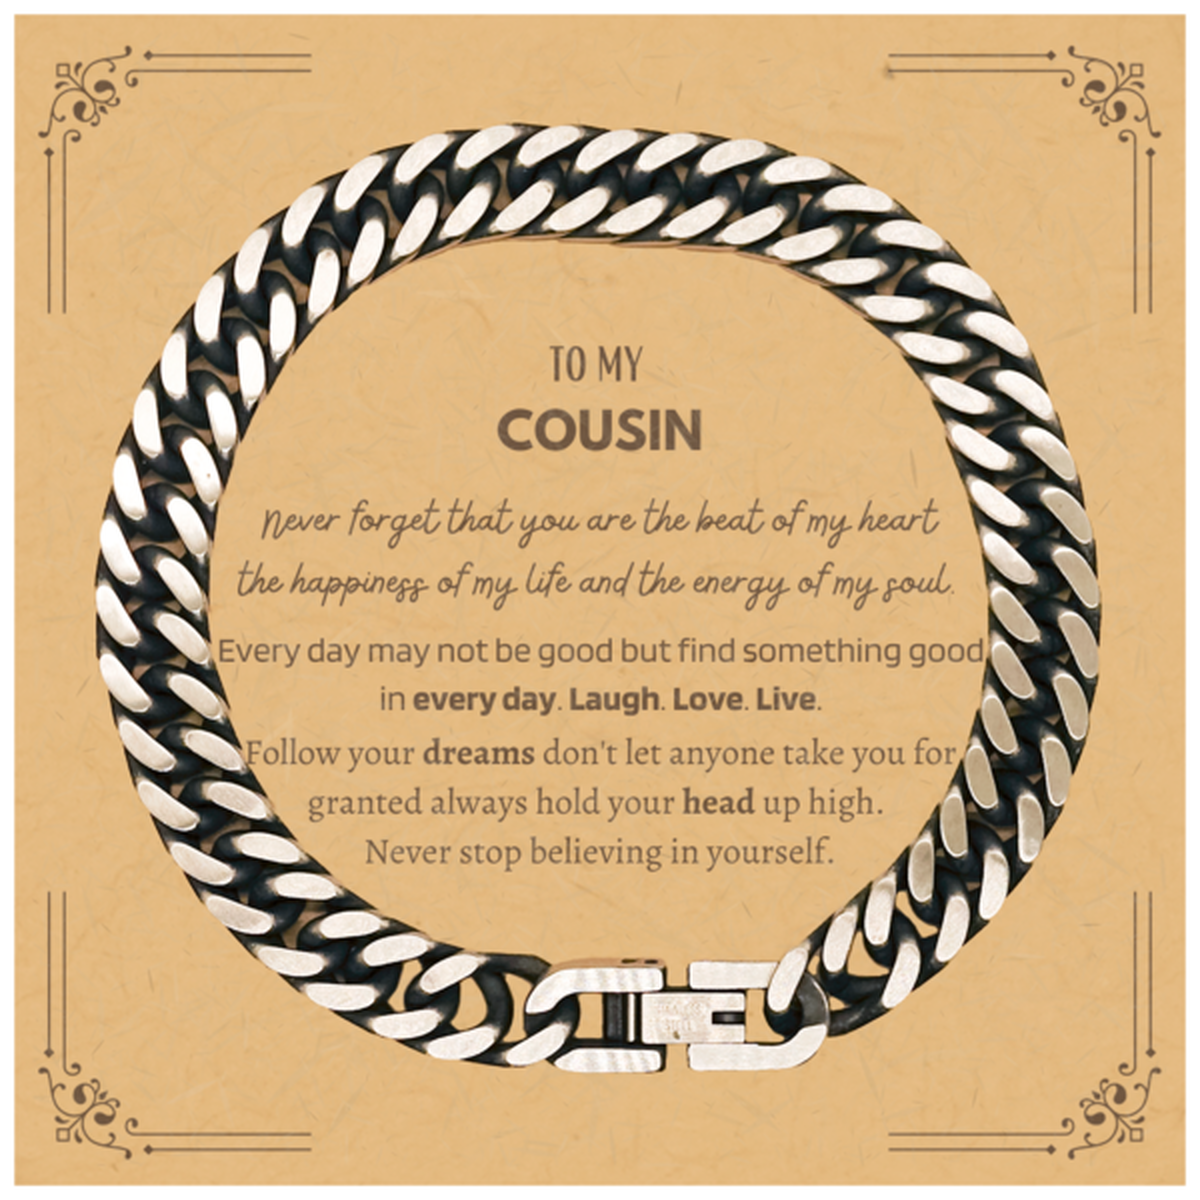 To My Cousin Message Card Gifts, Christmas Cousin Cuban Link Chain Bracelet Present, Birthday Unique Motivational For Cousin, To My Cousin Never forget that you are the beat of my heart the happiness of my life and the energy of my soul